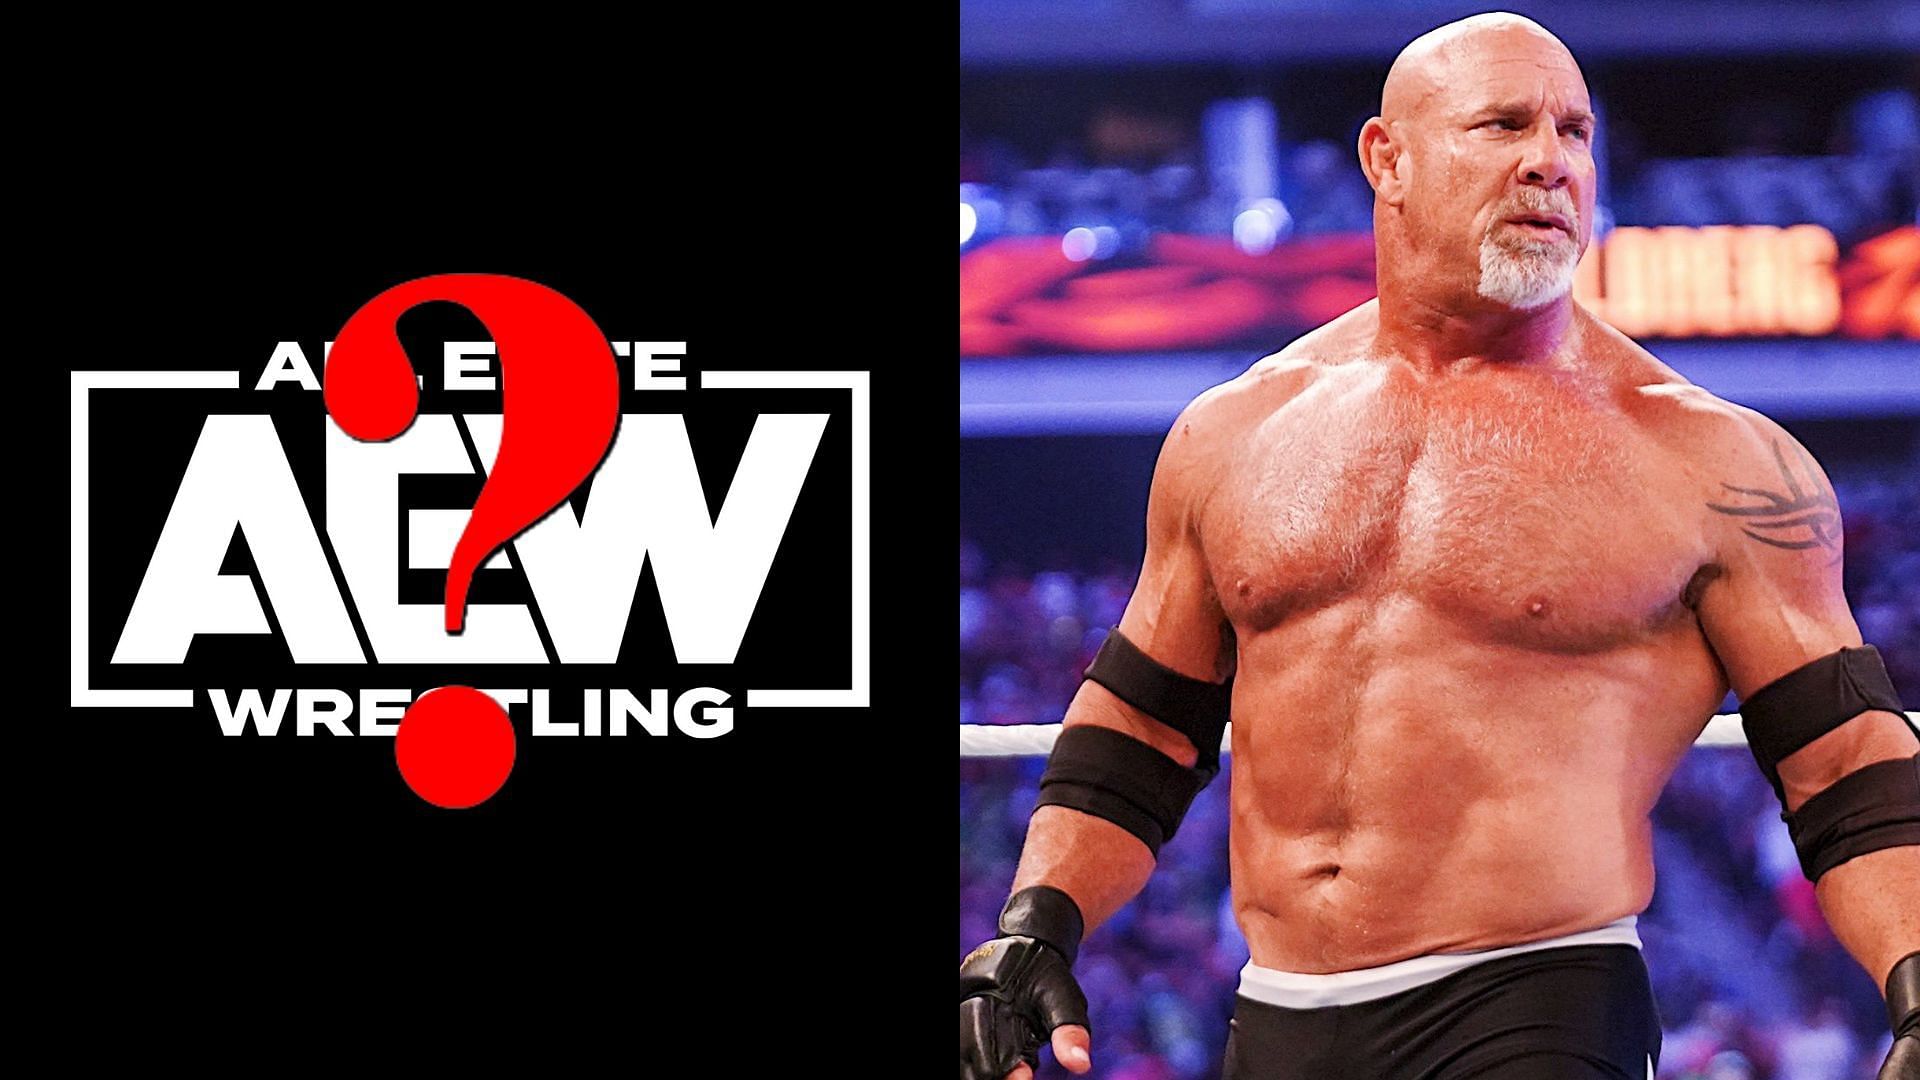 Could Goldberg find his way into AEW?